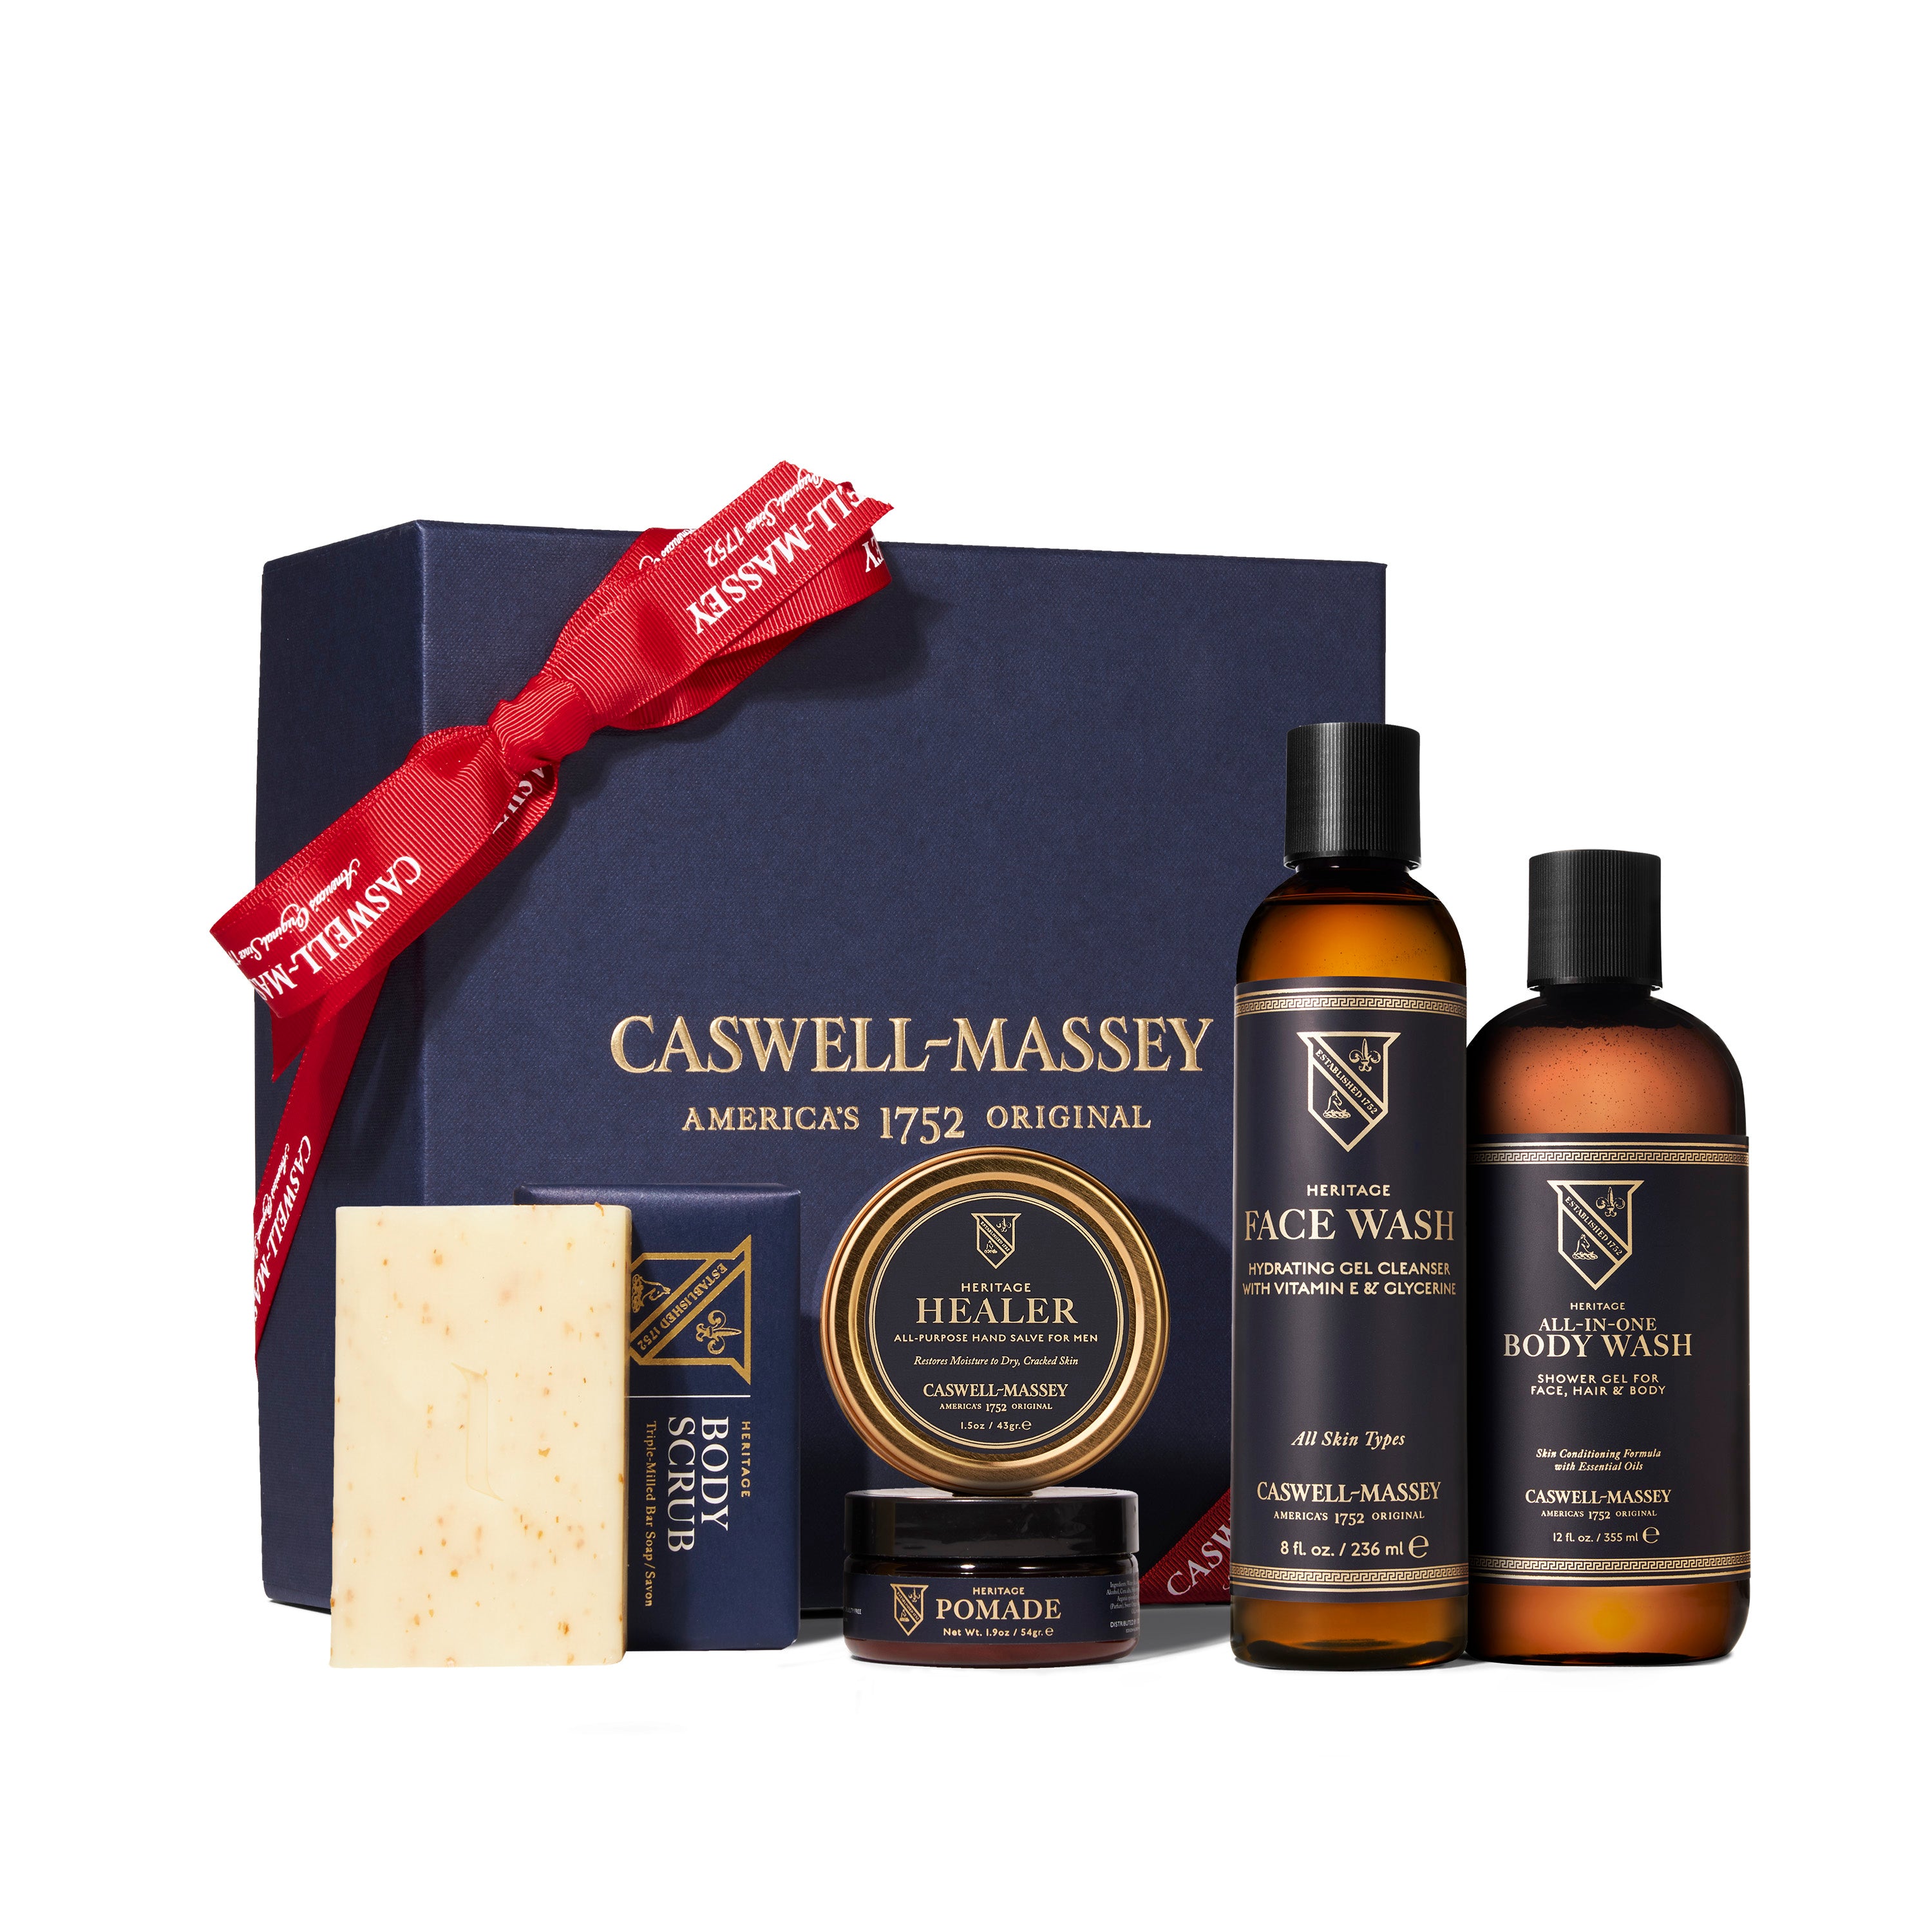 Men's Caswell-Massey Heritage Grooming Gift Set: Body Scrub Soap, Healer Hand Salve, Medium Fiber Hair Pomade, Face Wash, and All-in-One Body Wash included in navy gift box with red ribbon